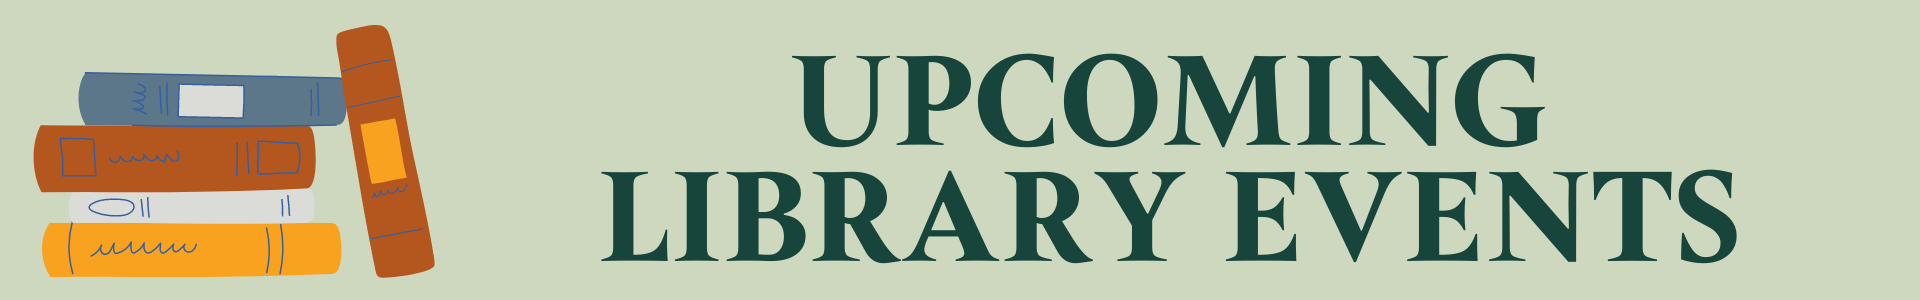 Upcoming Library Events